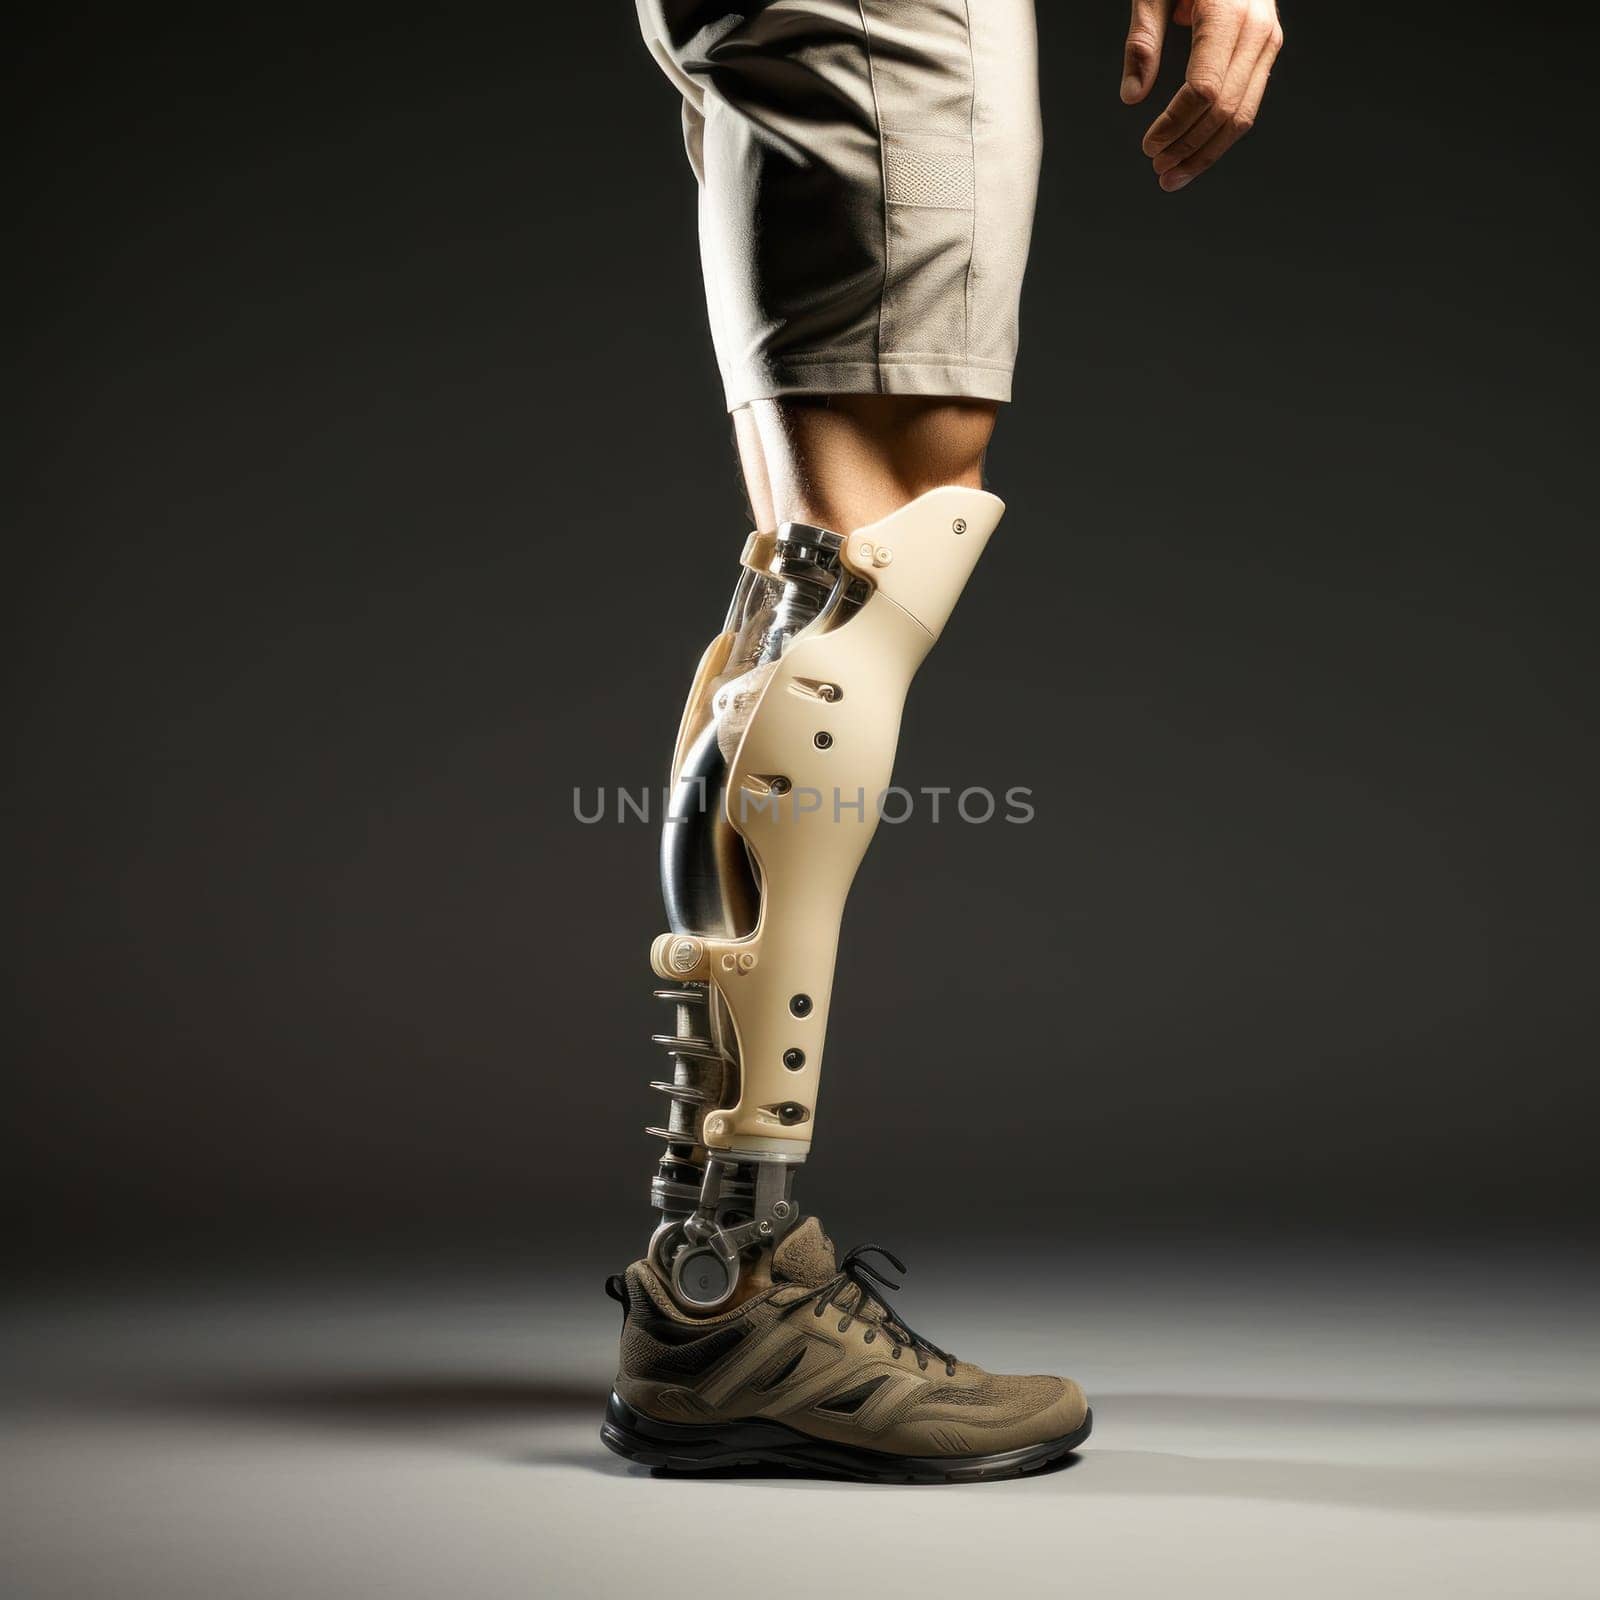 A unique image of a man with prosthetic legs, symbolizing the restoration of mobility and ergonomic support with modern medical technology.